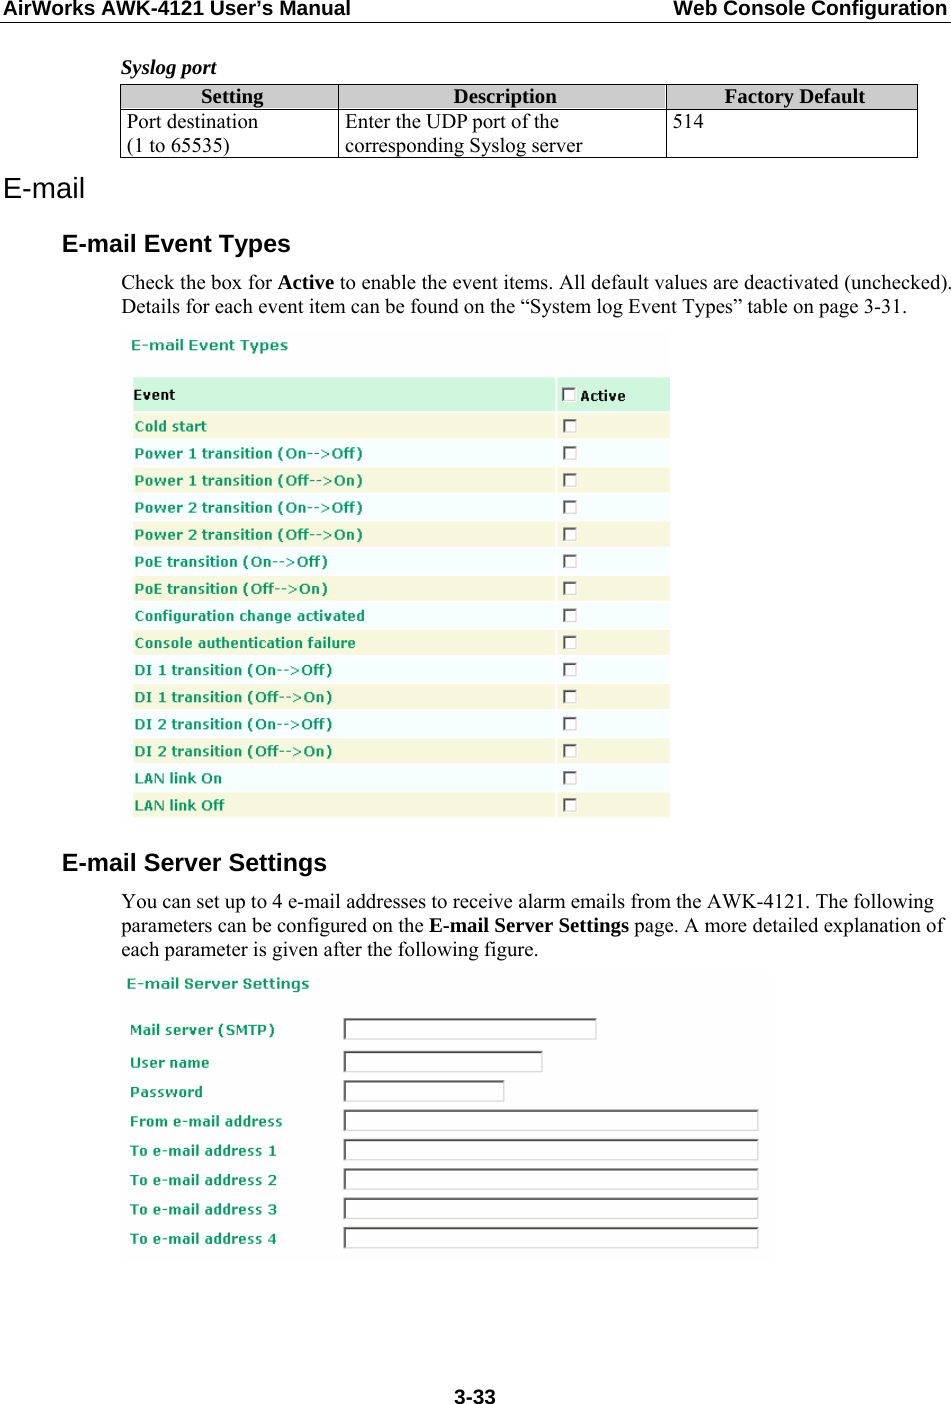 AirWorks AWK-4121 User’s Manual  Web Console Configuration Syslog port Setting  Description  Factory Default Port destination   (1 to 65535) Enter the UDP port of the corresponding Syslog server 514 E-mail E-mail Event Types Check the box for Active to enable the event items. All default values are deactivated (unchecked). Details for each event item can be found on the “System log Event Types” table on page 3-31.  E-mail Server Settings You can set up to 4 e-mail addresses to receive alarm emails from the AWK-4121. The following parameters can be configured on the E-mail Server Settings page. A more detailed explanation of each parameter is given after the following figure.       3-33